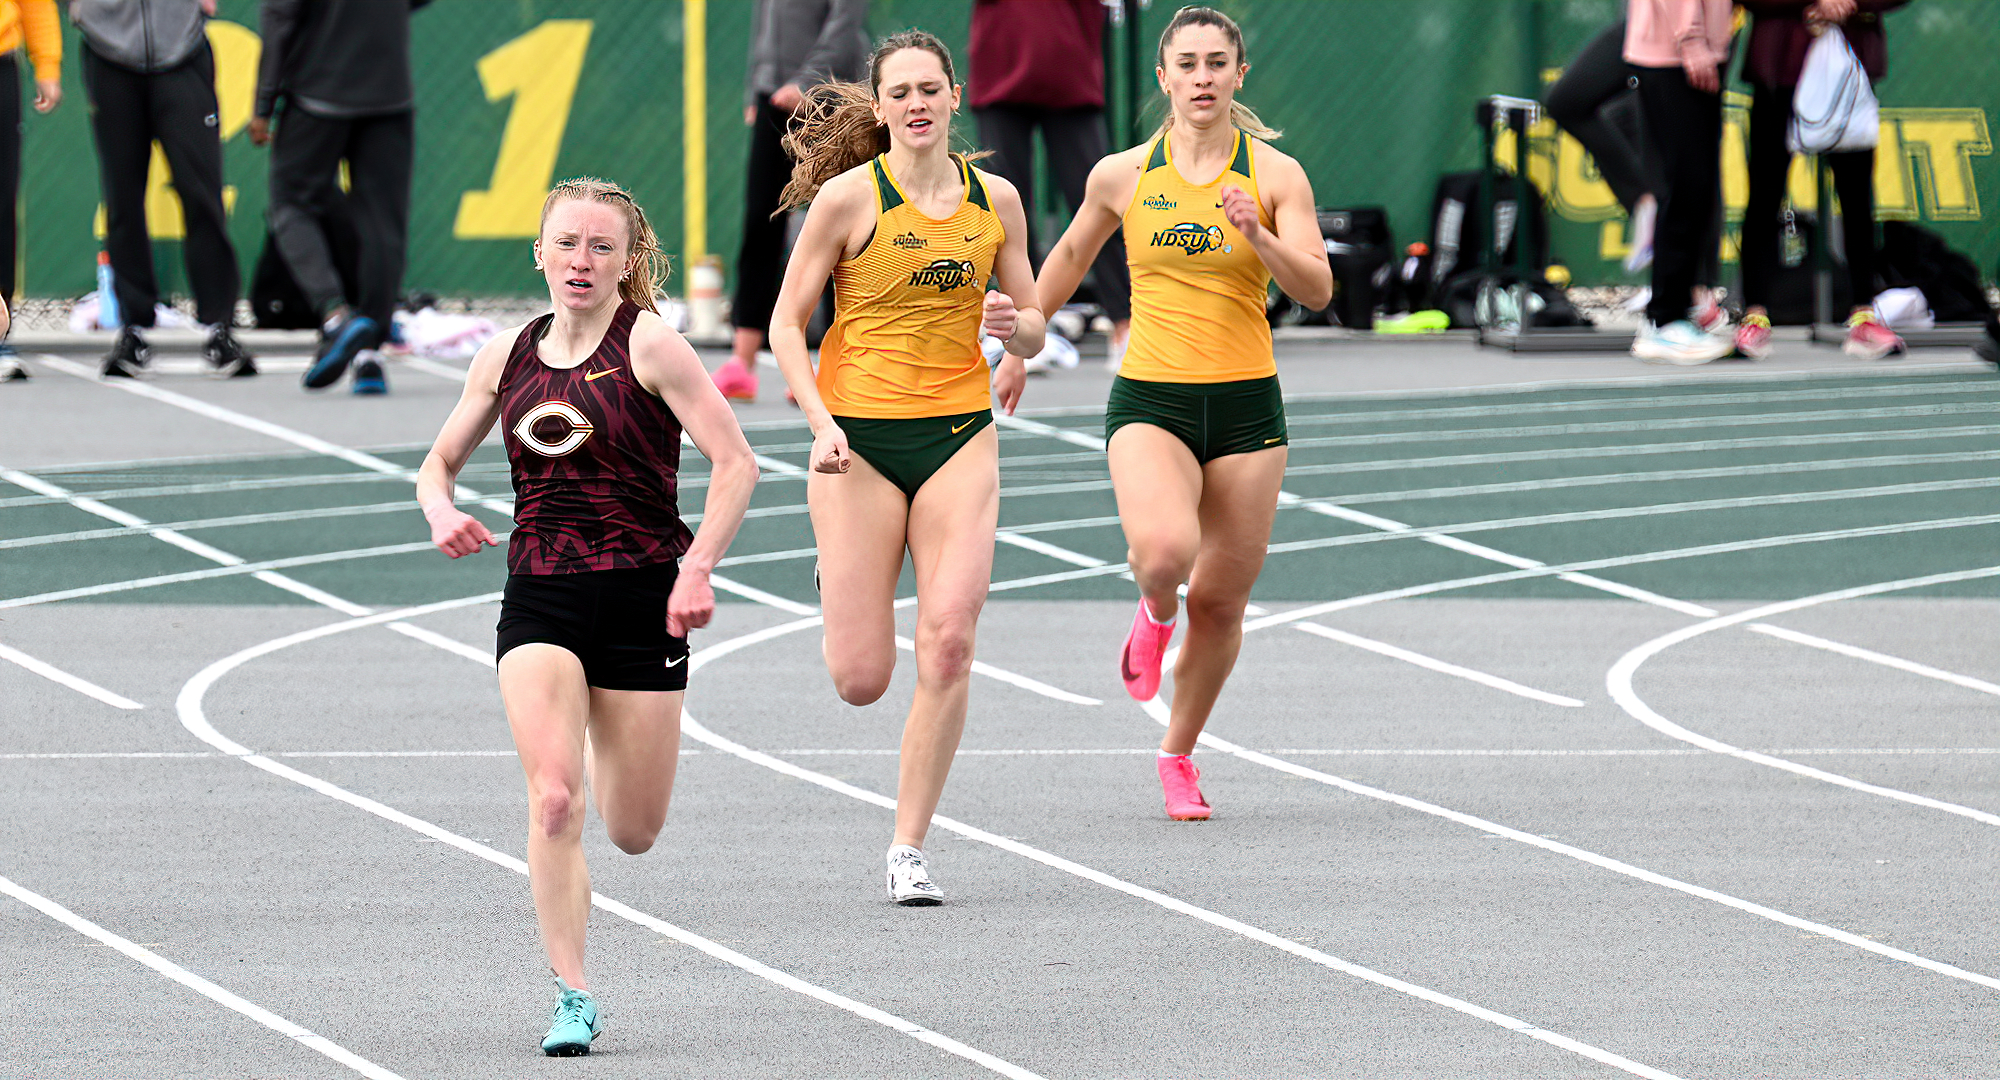 Maddie Guler comes out of the turn and heads for home in the 400 meters at the NDSU Tune-Up Meet. She won her heat with a time of 1:02.07.